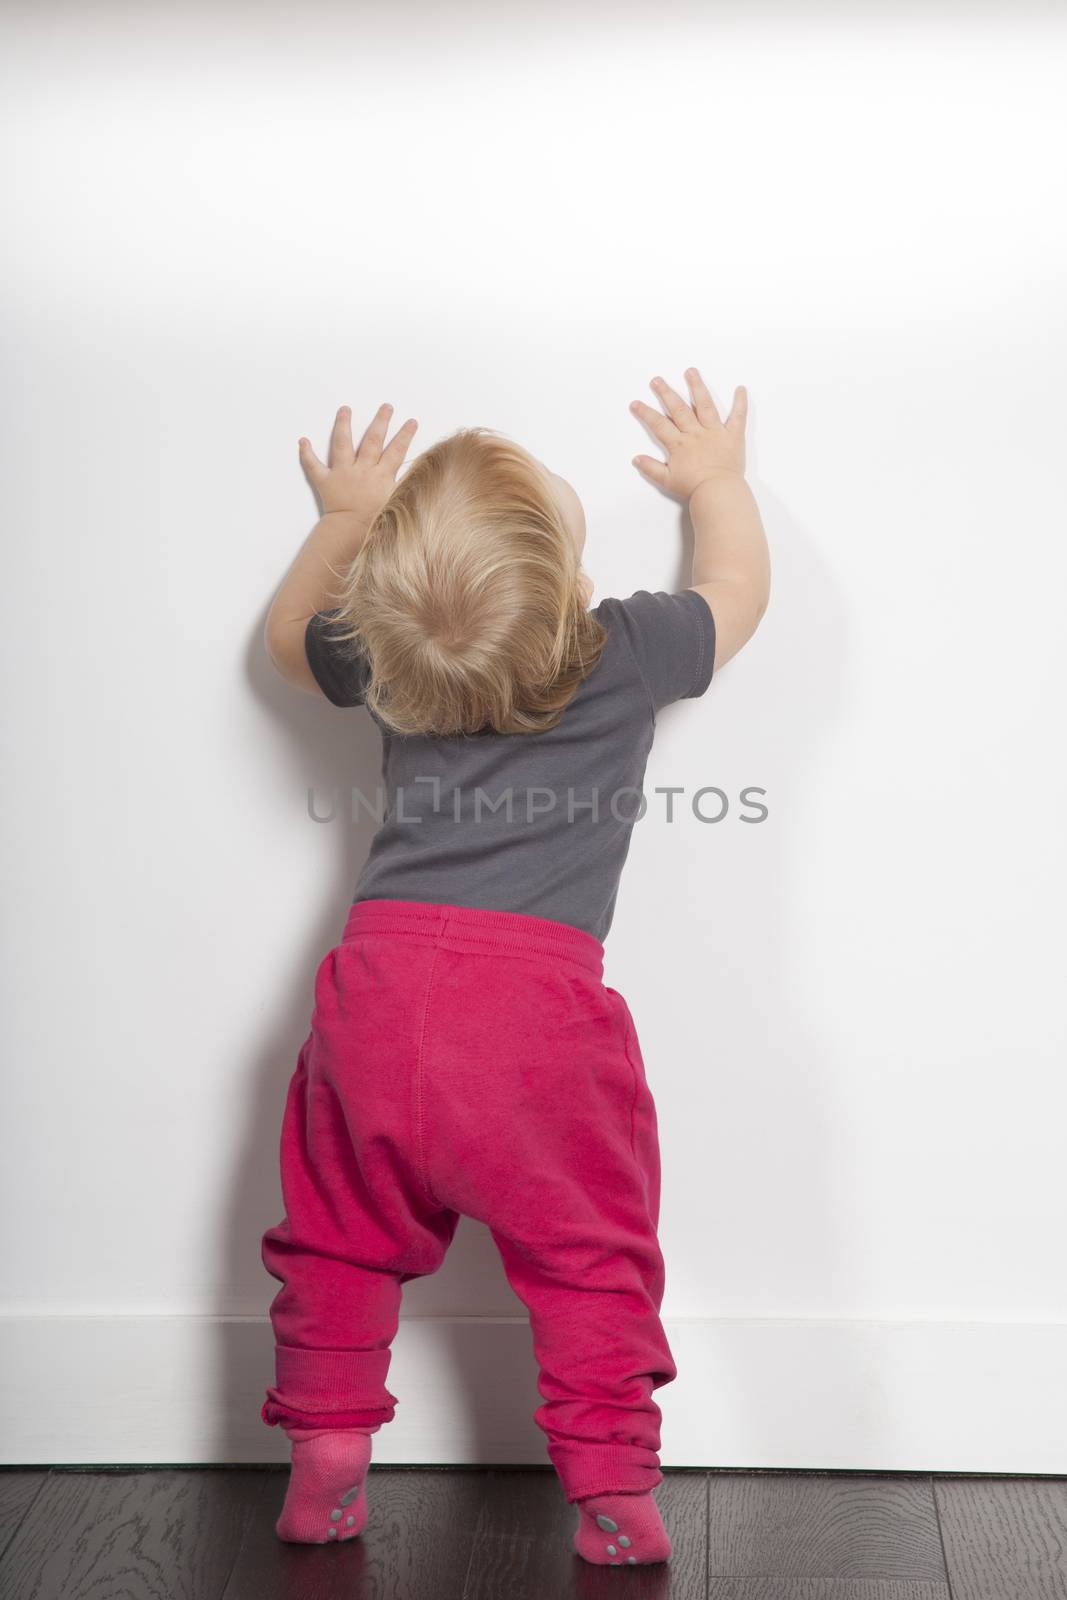 one year age blonde lovely cute caucasian white baby grey shirt pink trousers and shocks standing indoor on brown floor against white wall looking up copy space